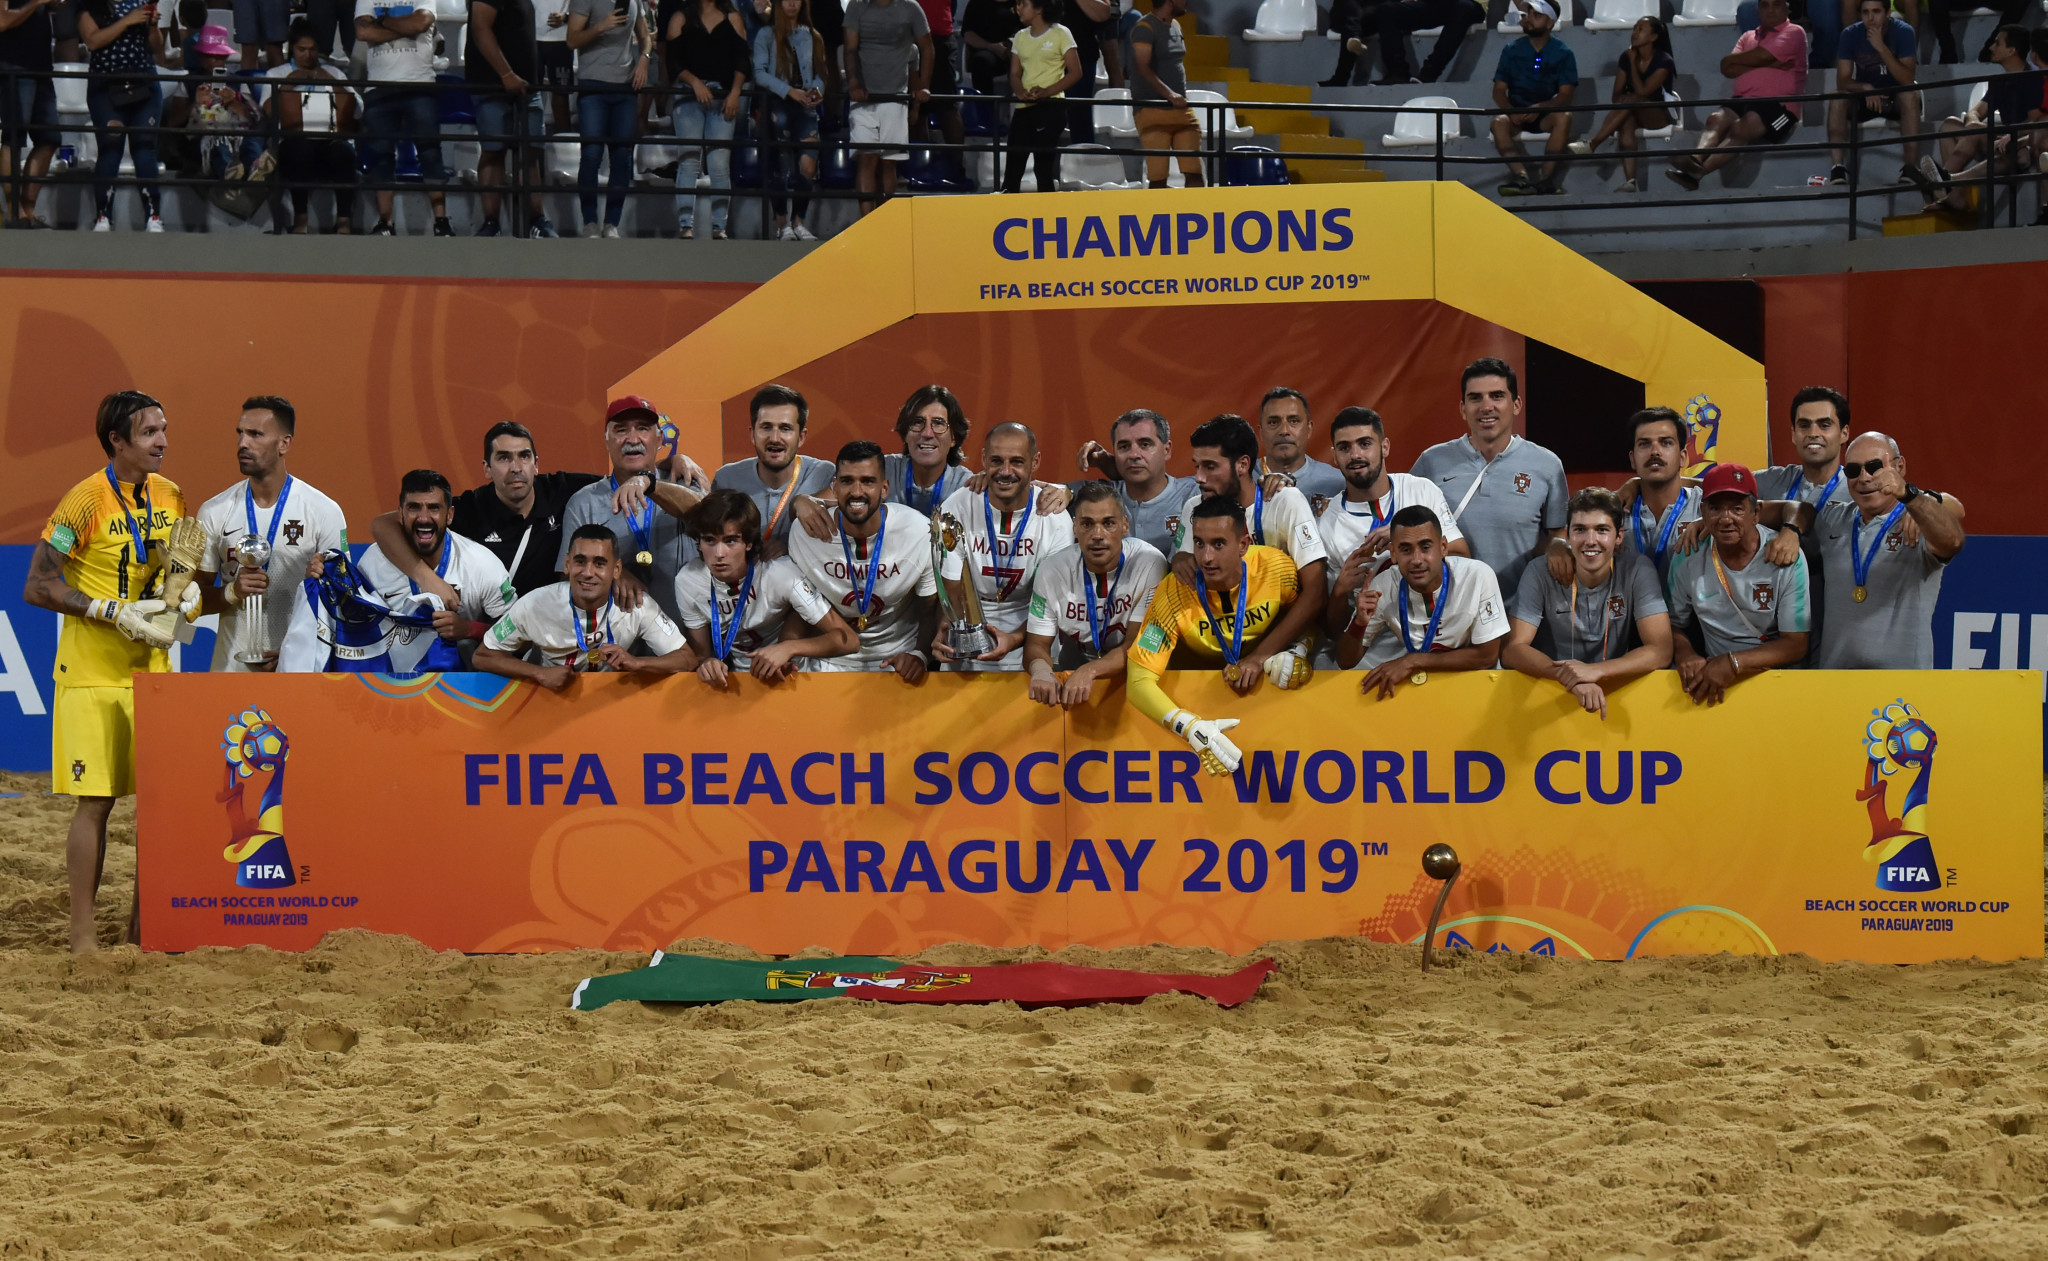 The 2019 FIFA Beach Soccer World Cup was won by Portugal in Paraguay ©Getty Images